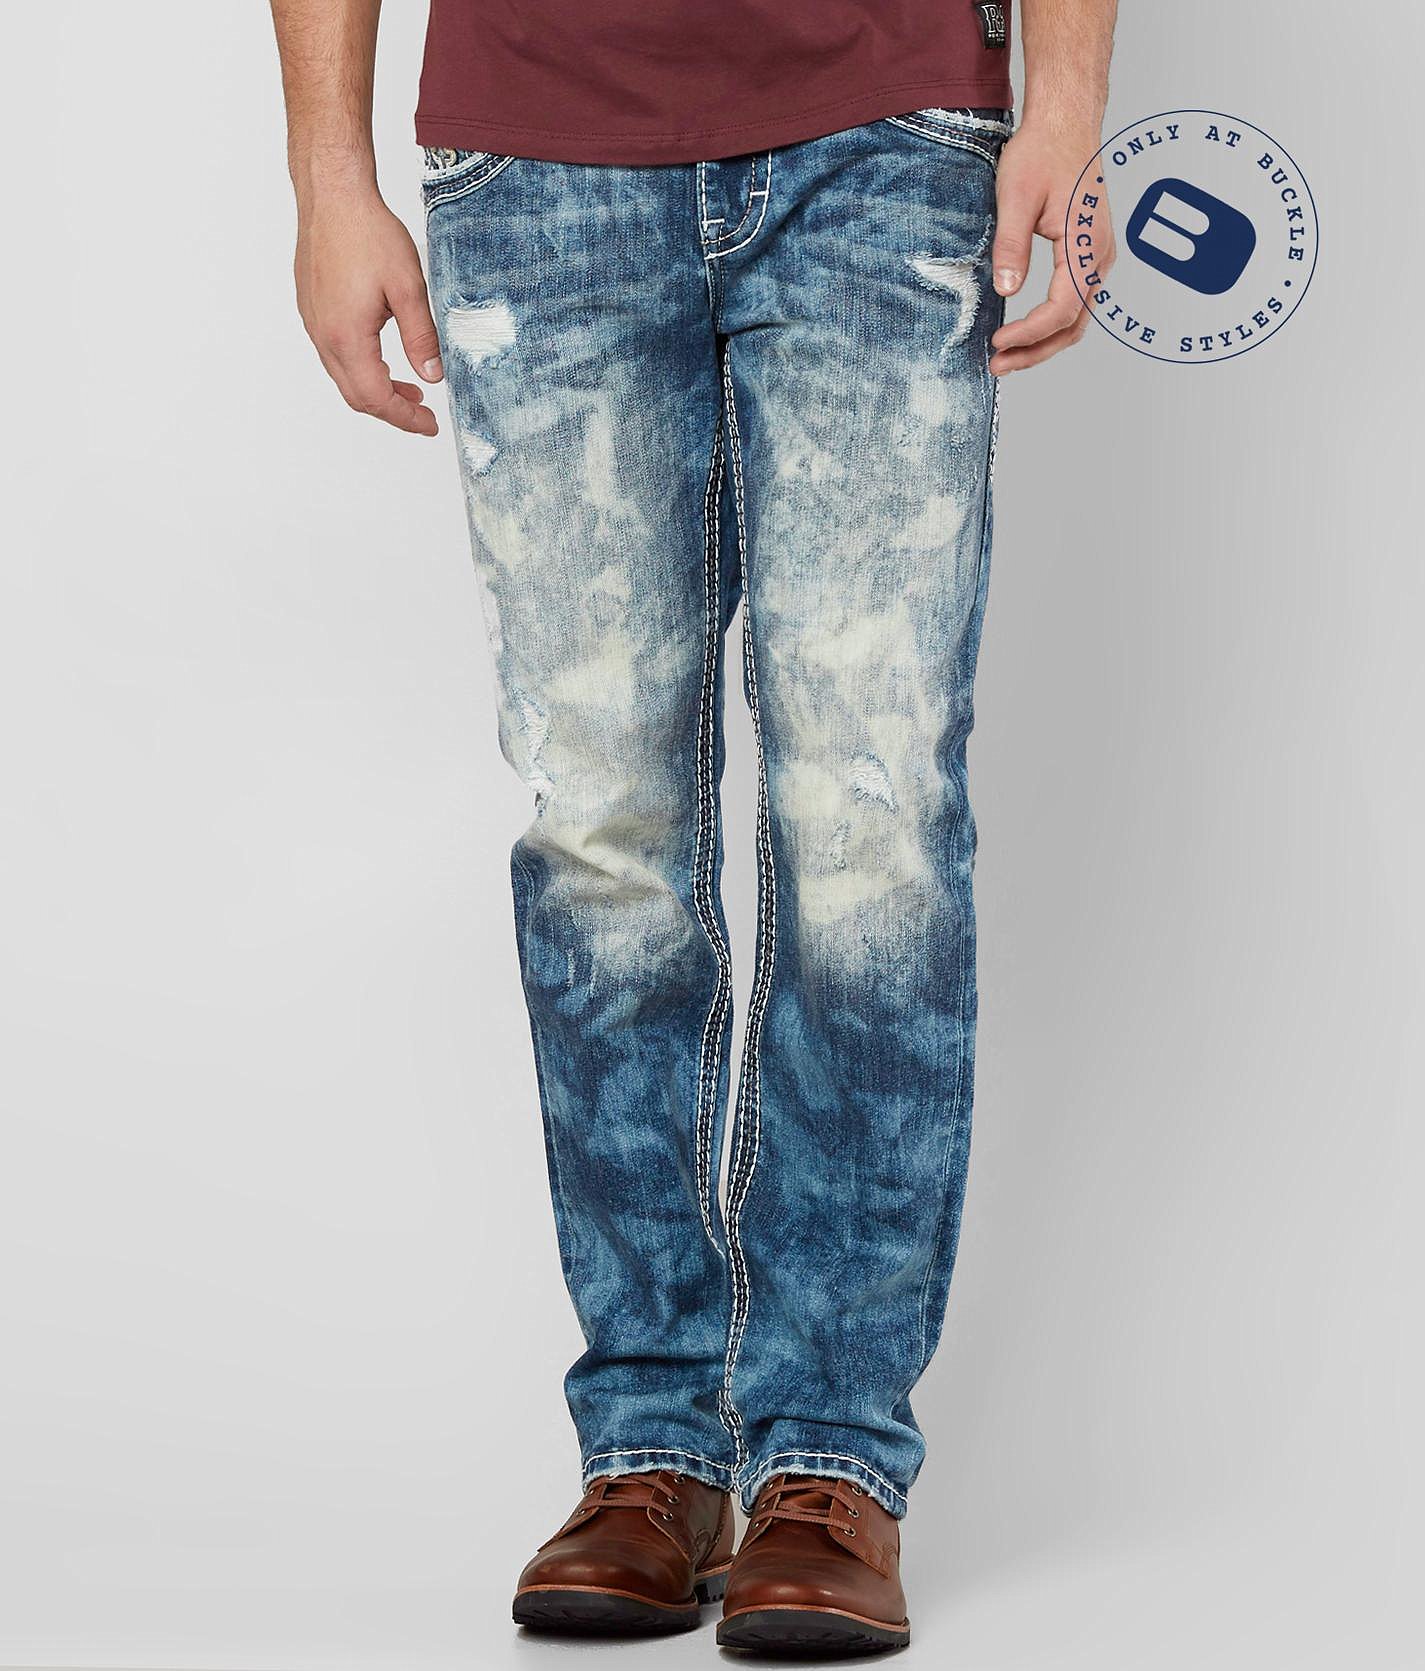 buckle jeans for men